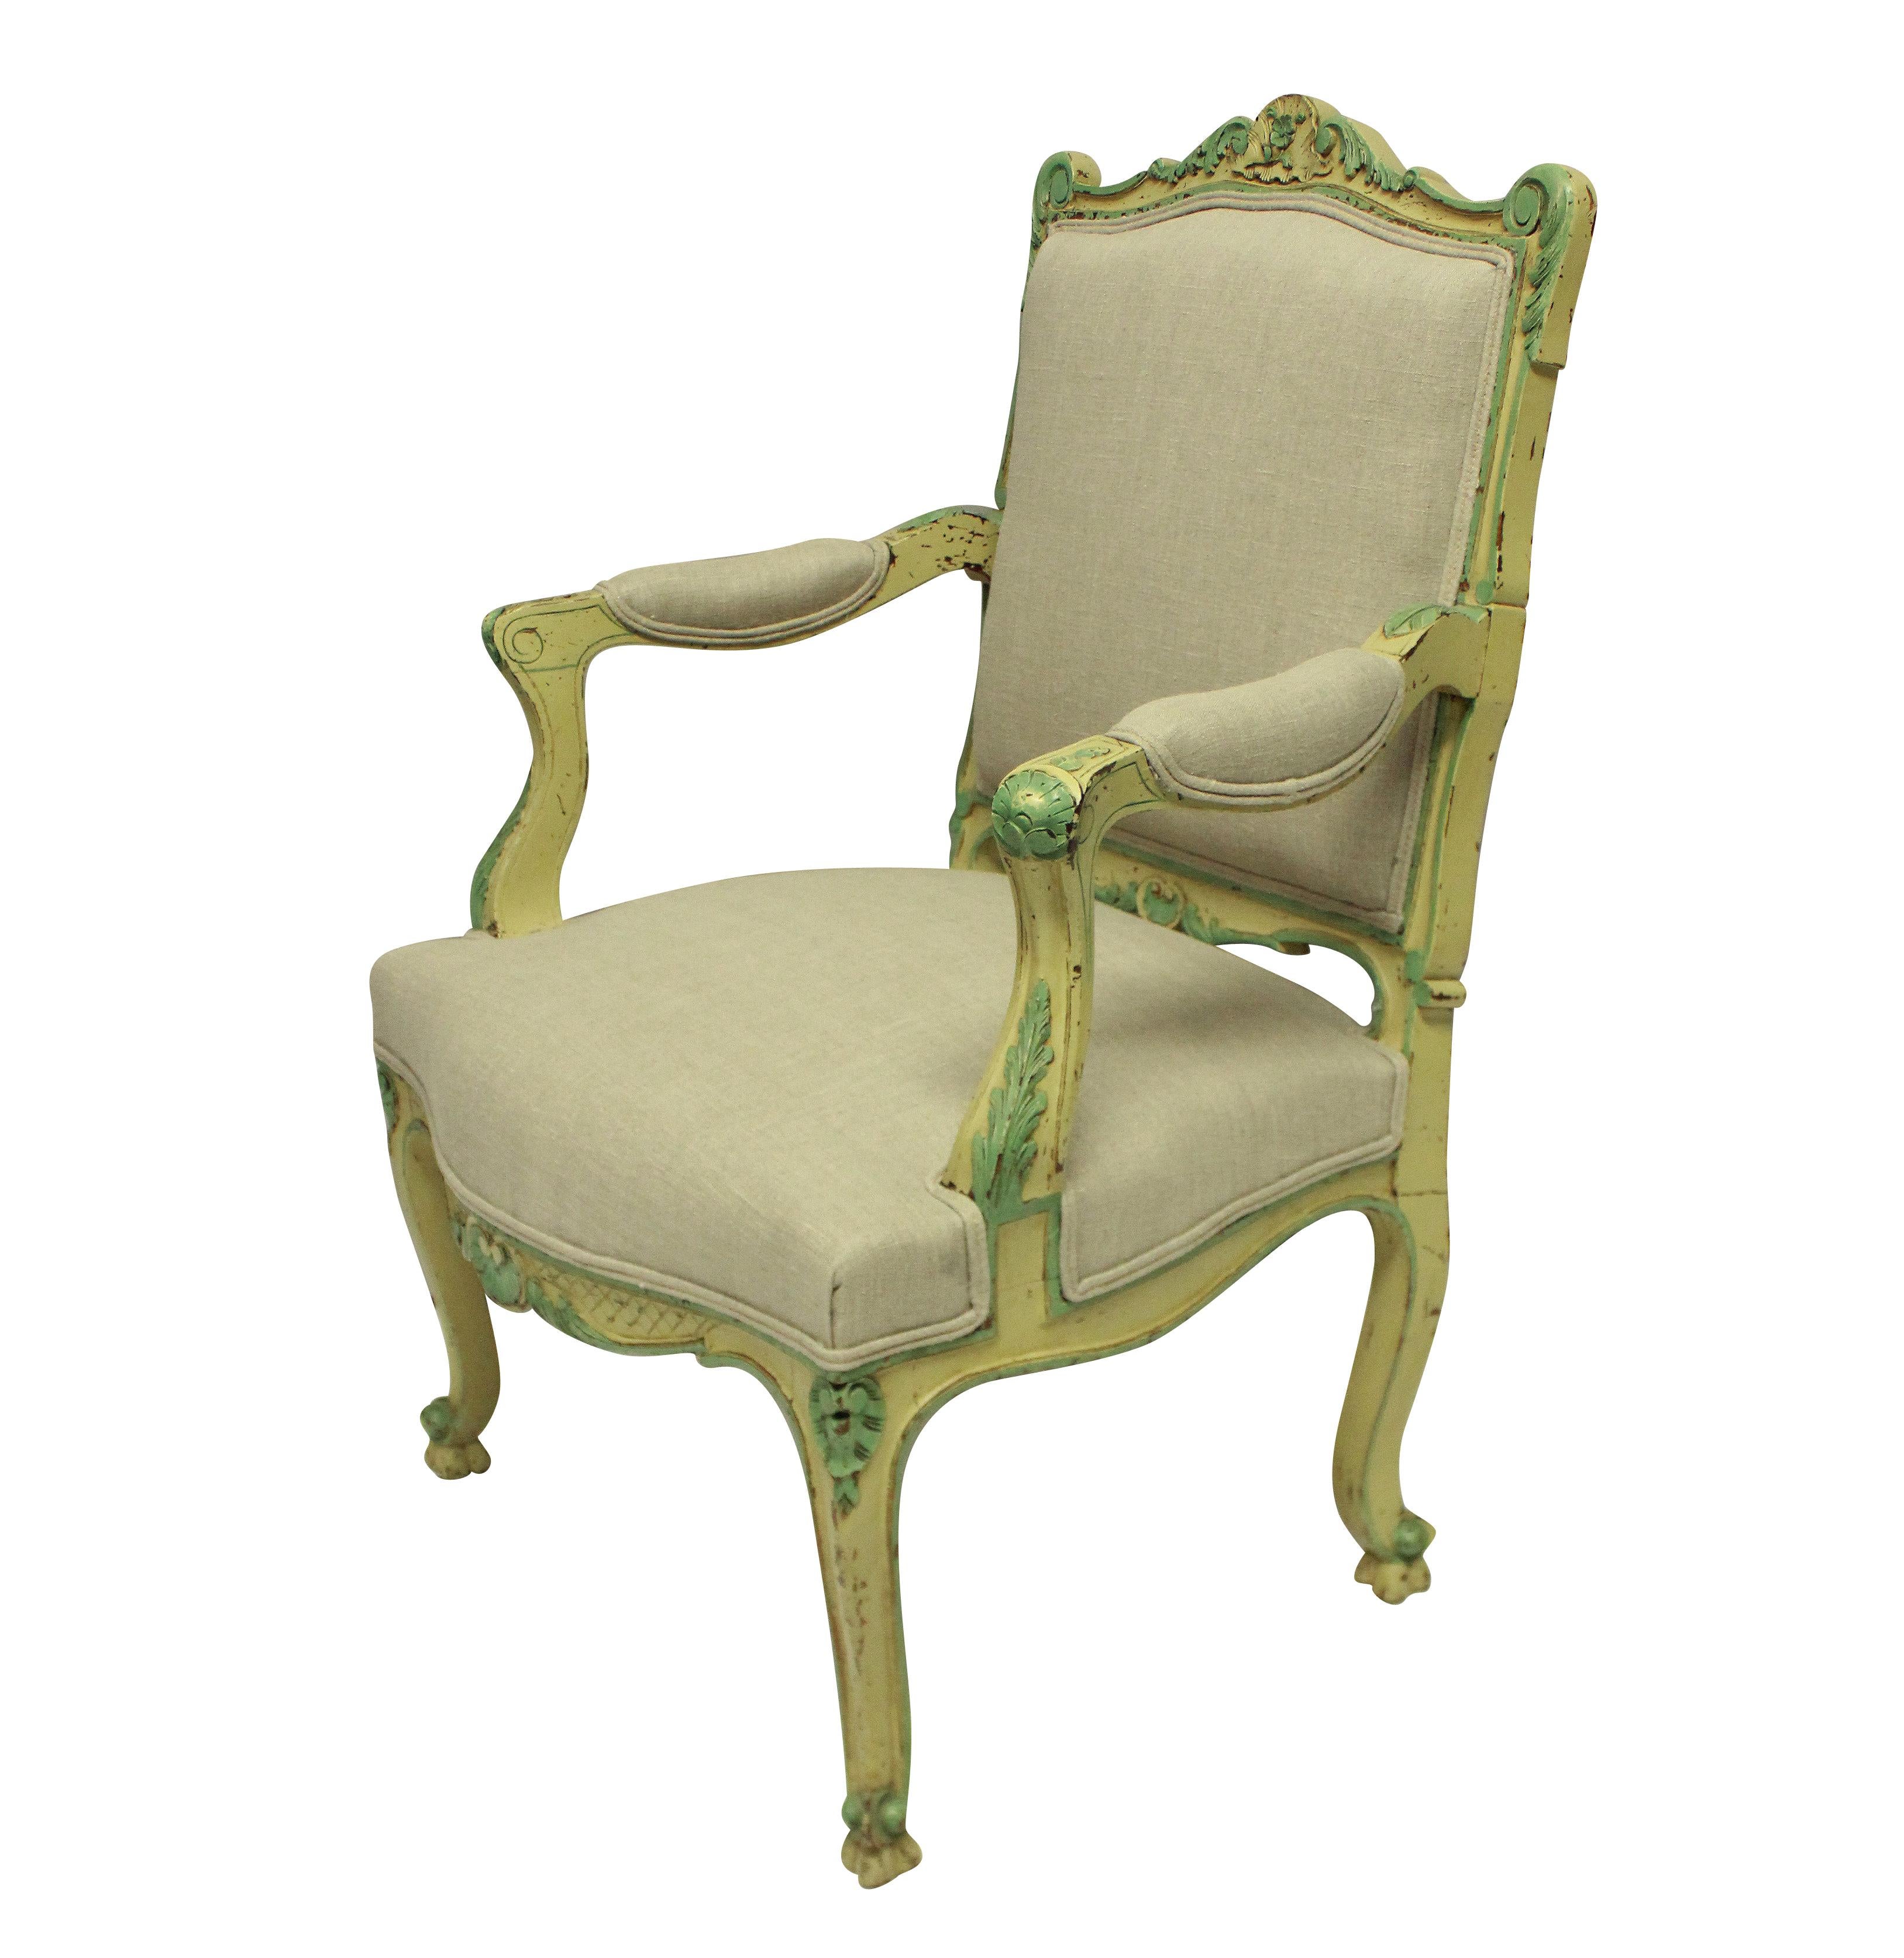 French Pair of Louis XV Style Armchairs in Pale Yellow and Green Paints